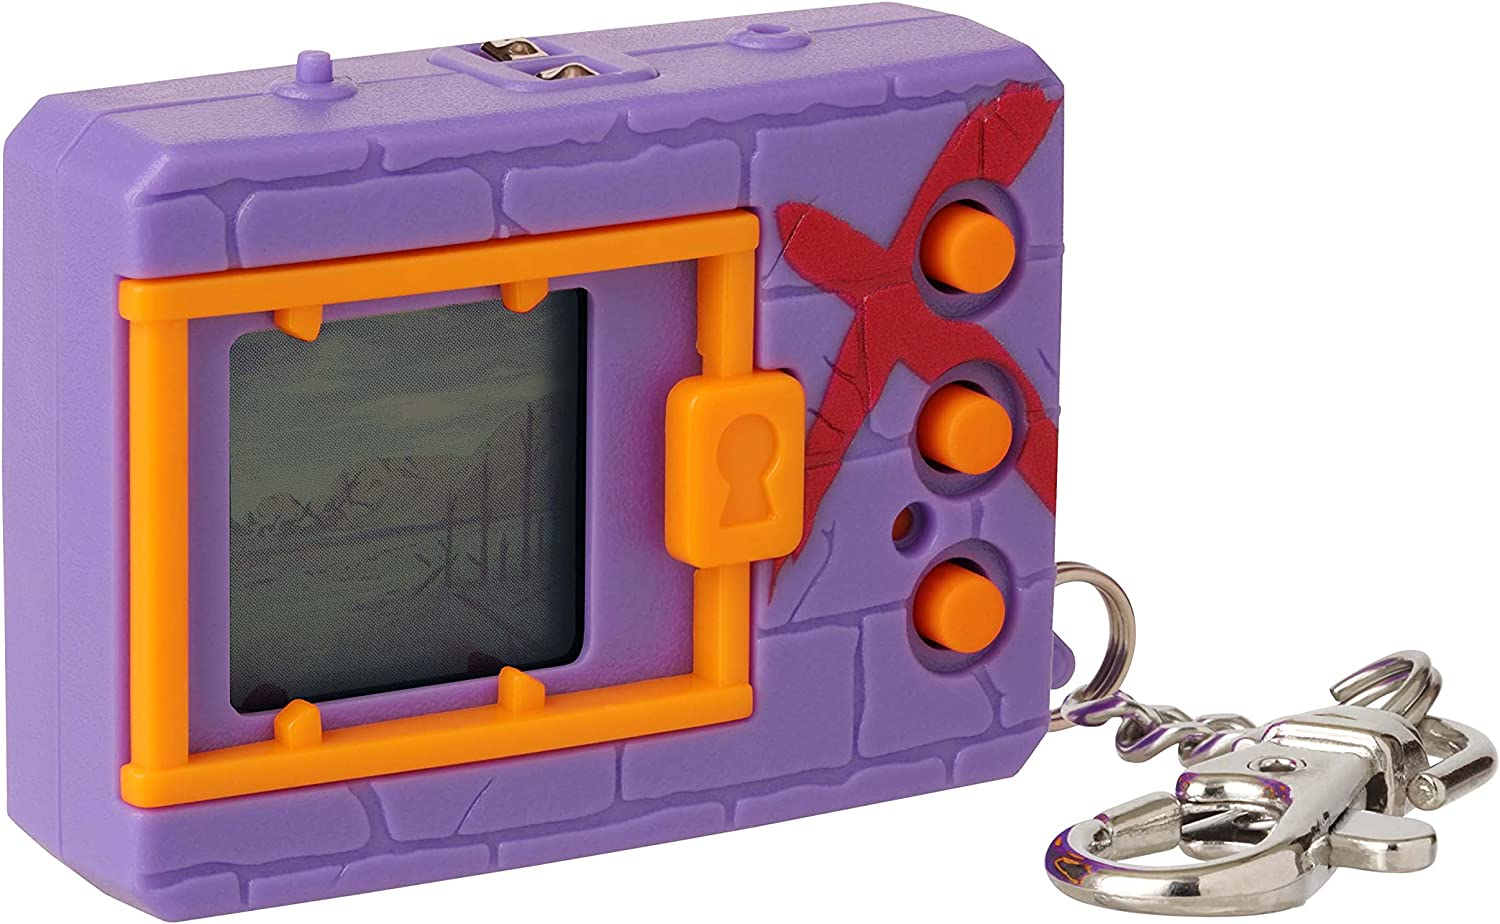 Digimon X (Purple & Red) image count 1